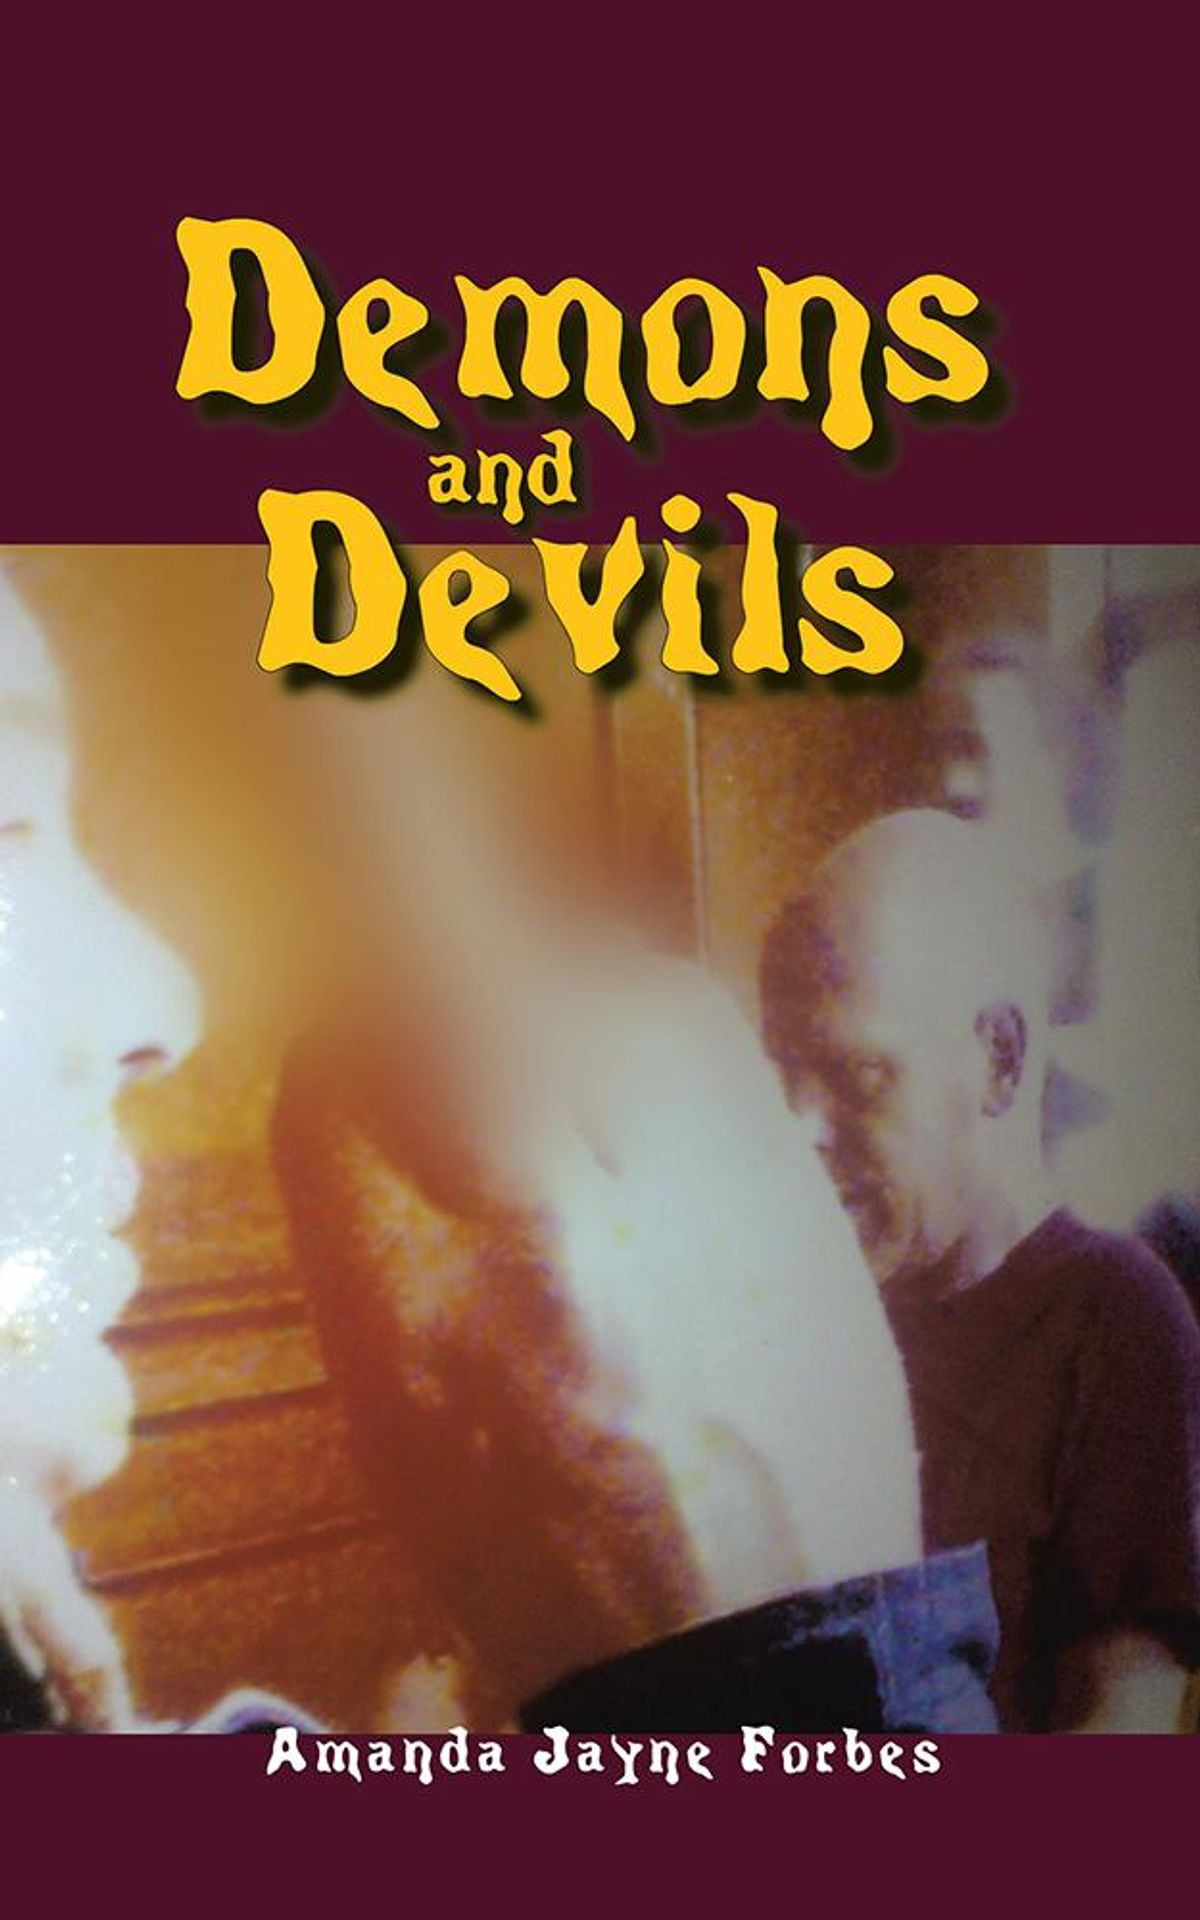 the complete book of demons and devils